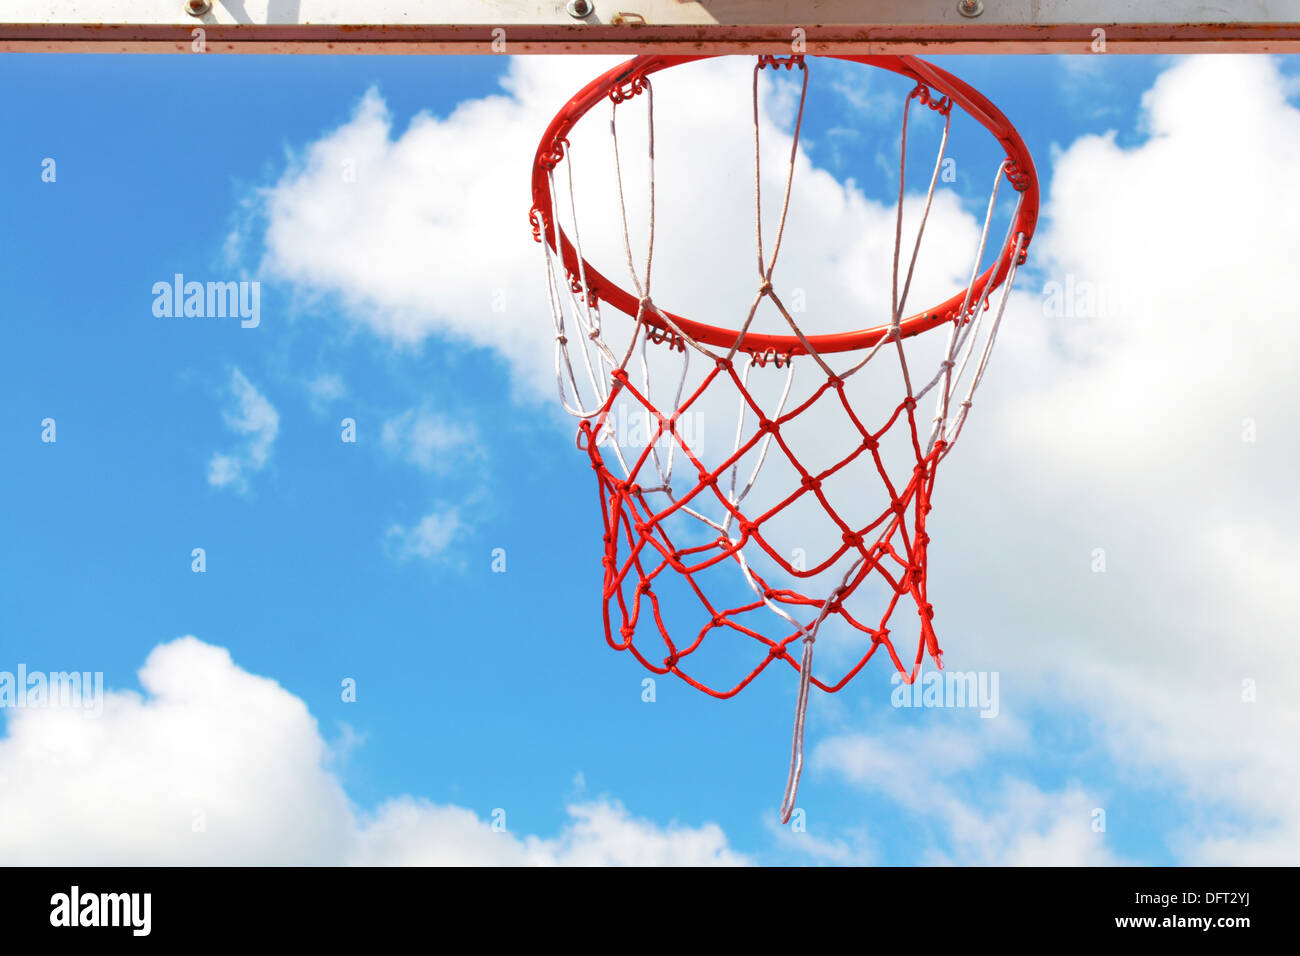 Basketball hoop in the blue sky Stock Photo